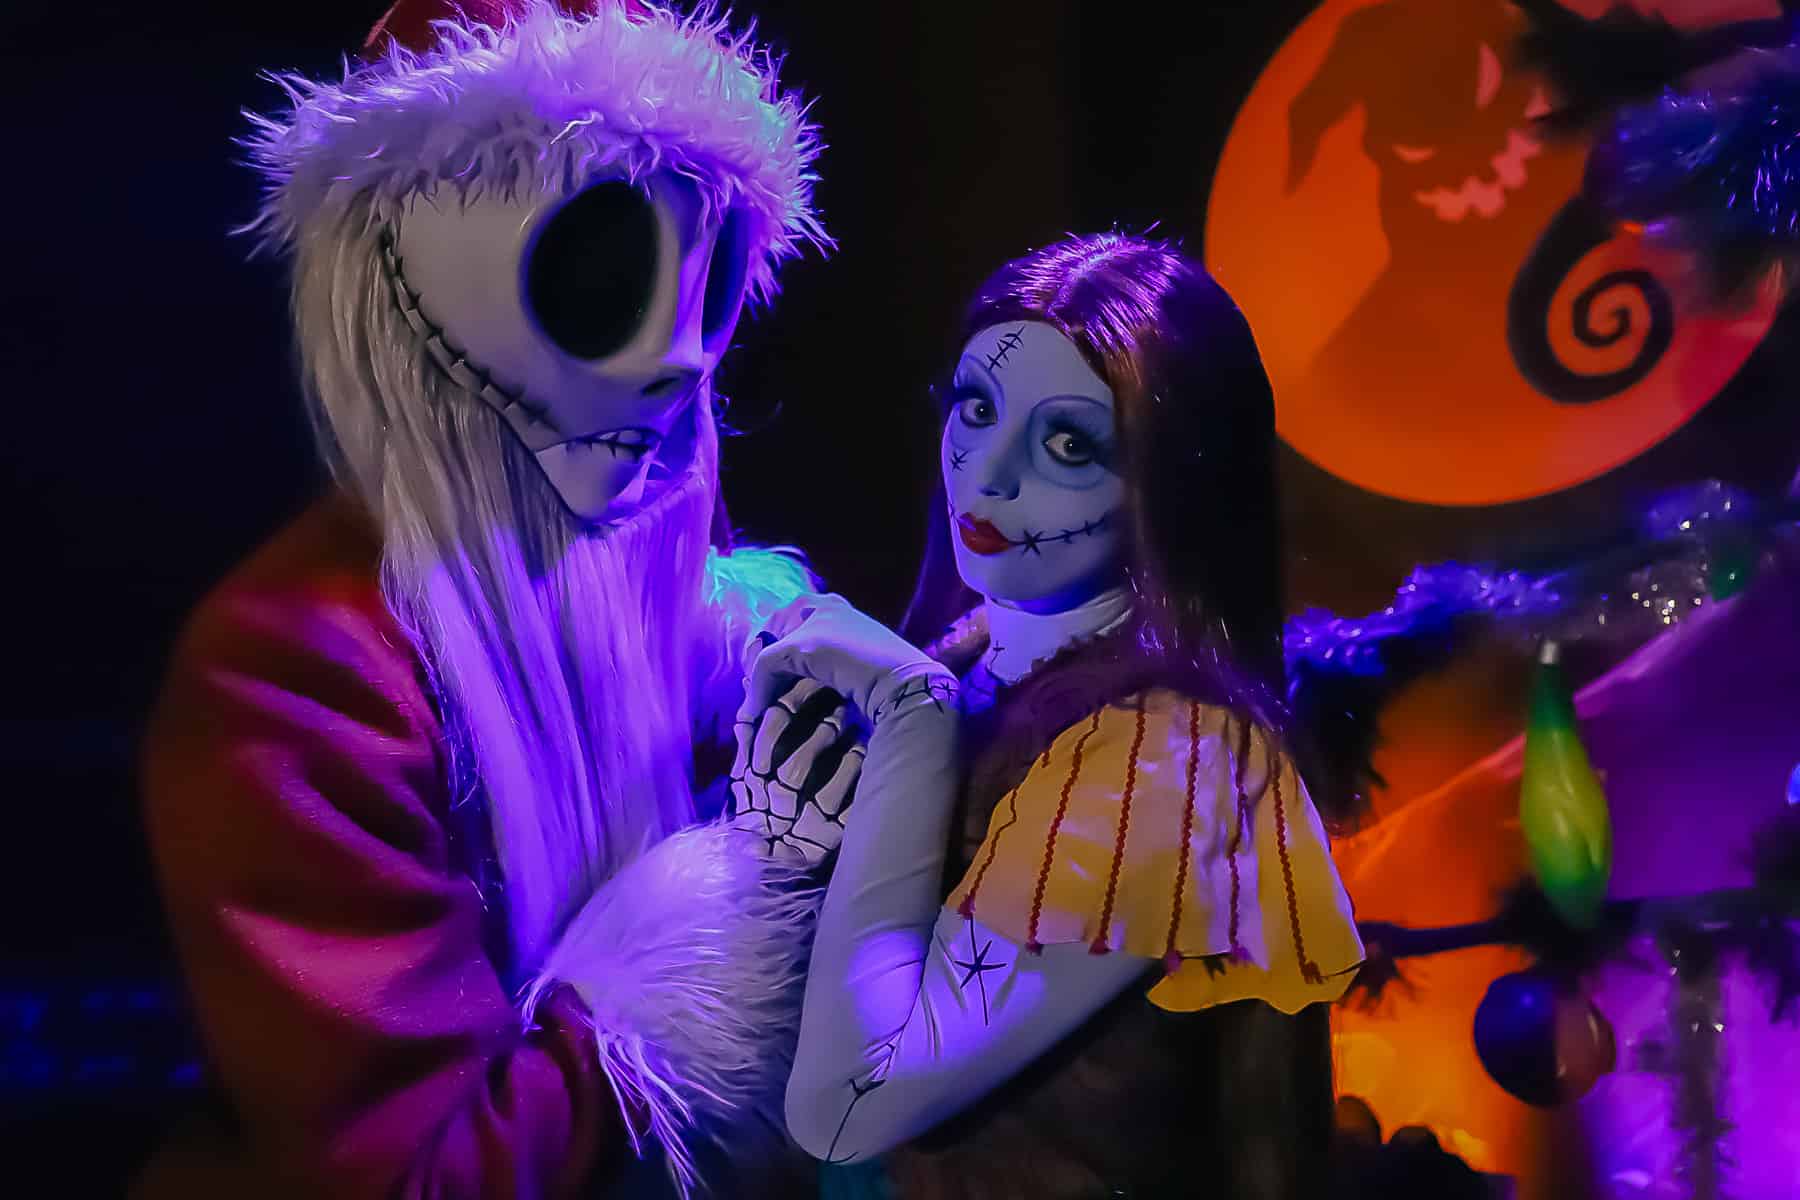 Jack Skellington as Sandy Claws with Sally at their character meet at Mickey's Very Merry Christmas Party. 